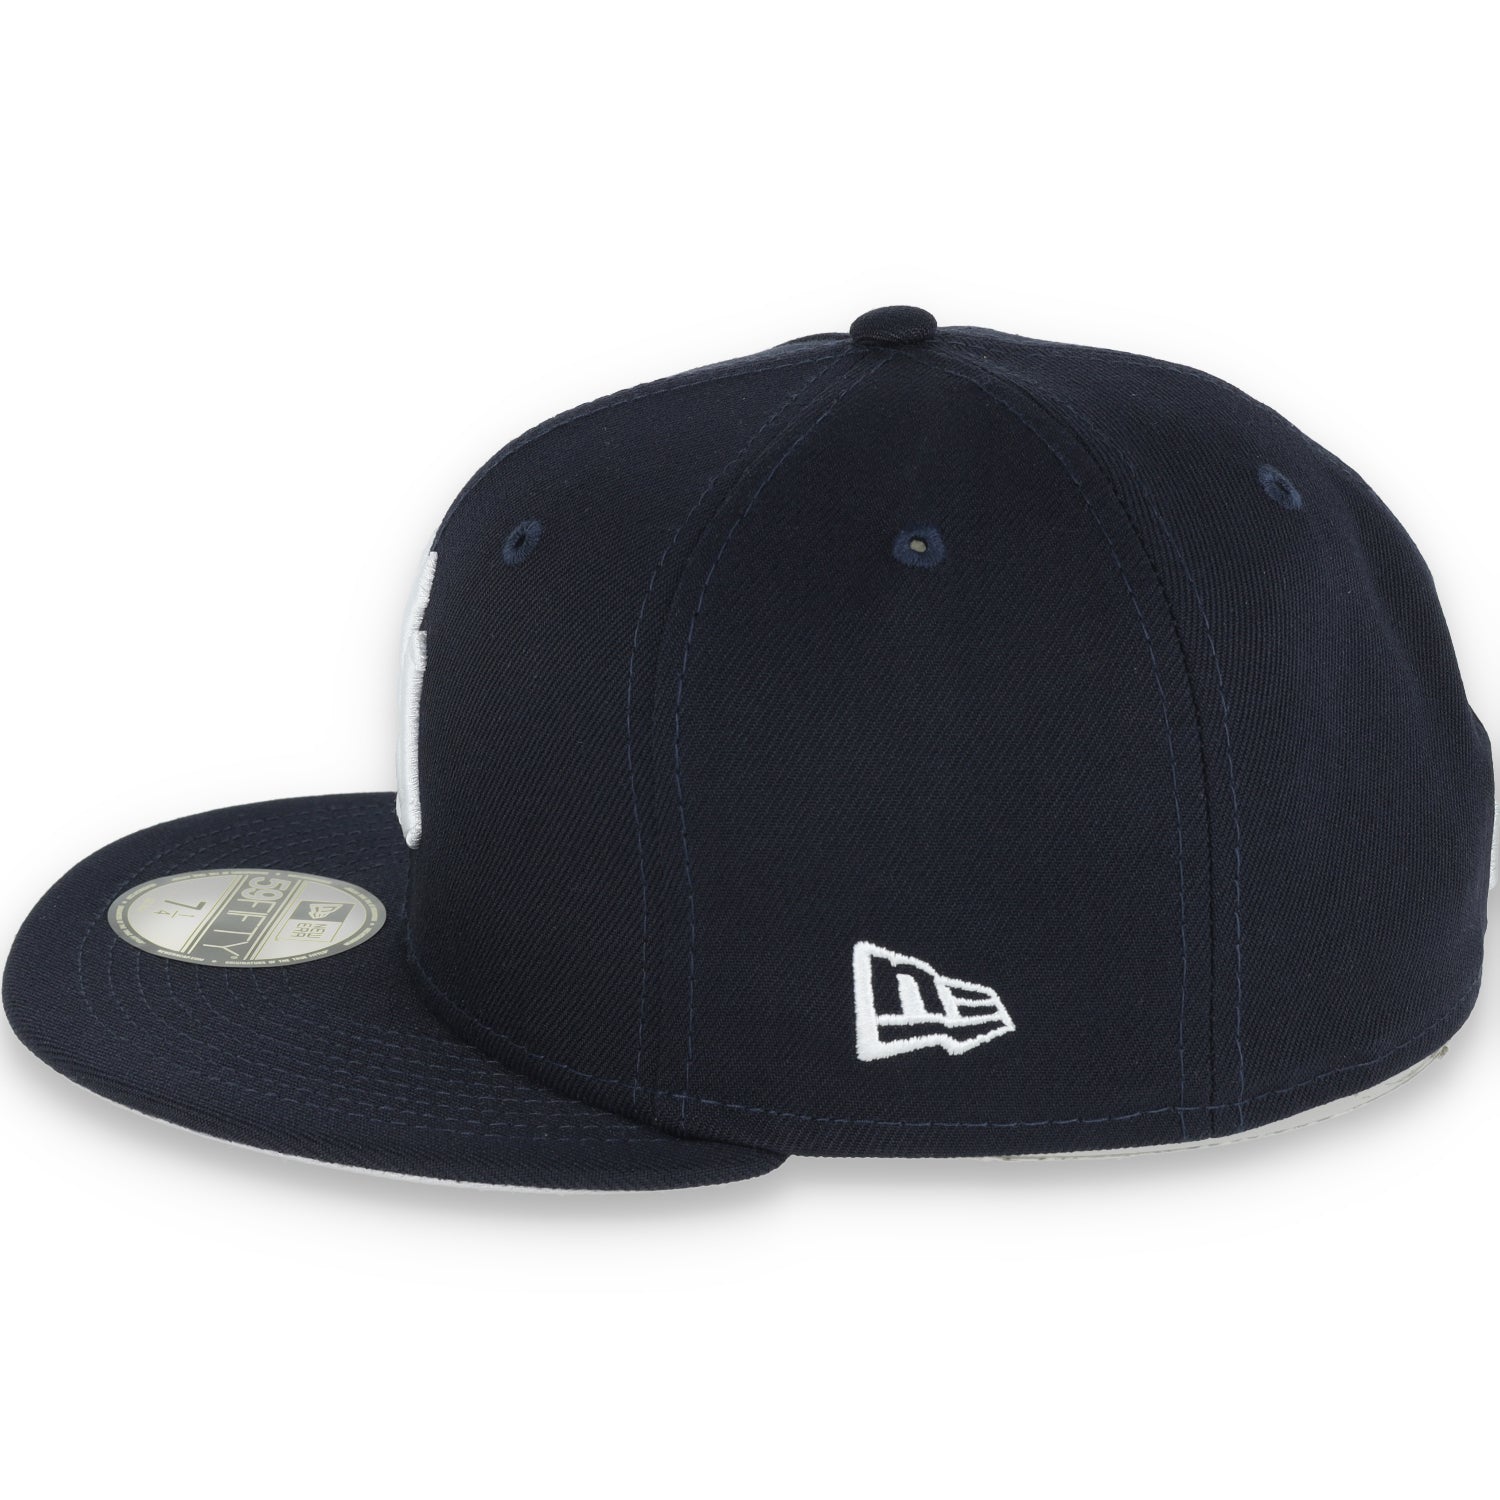 New Era New York Yankees Team Name Side Patch 59FIFTY Fitted Hat